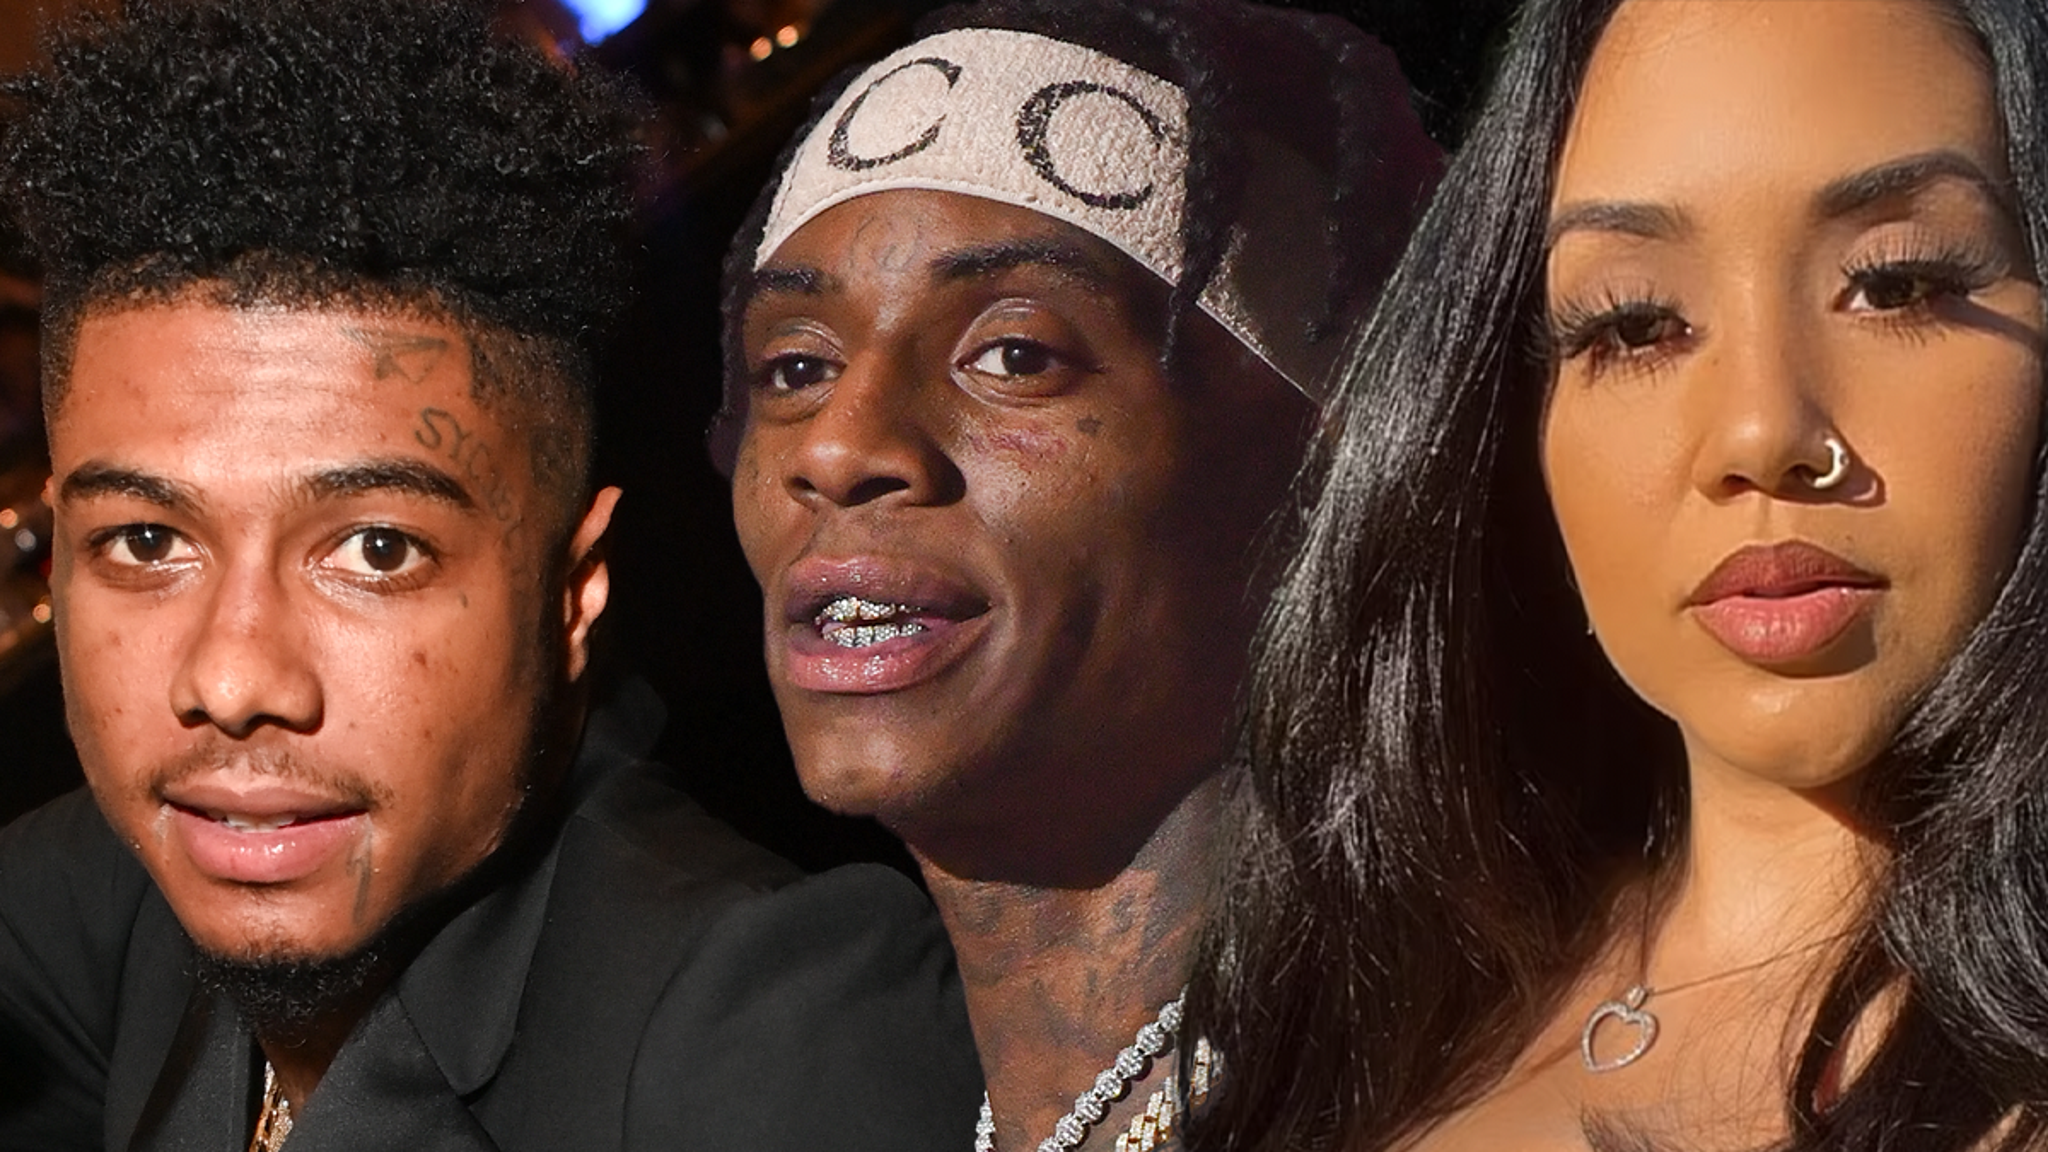 Blueface sued by Soulja Boy's baby mama for defamation